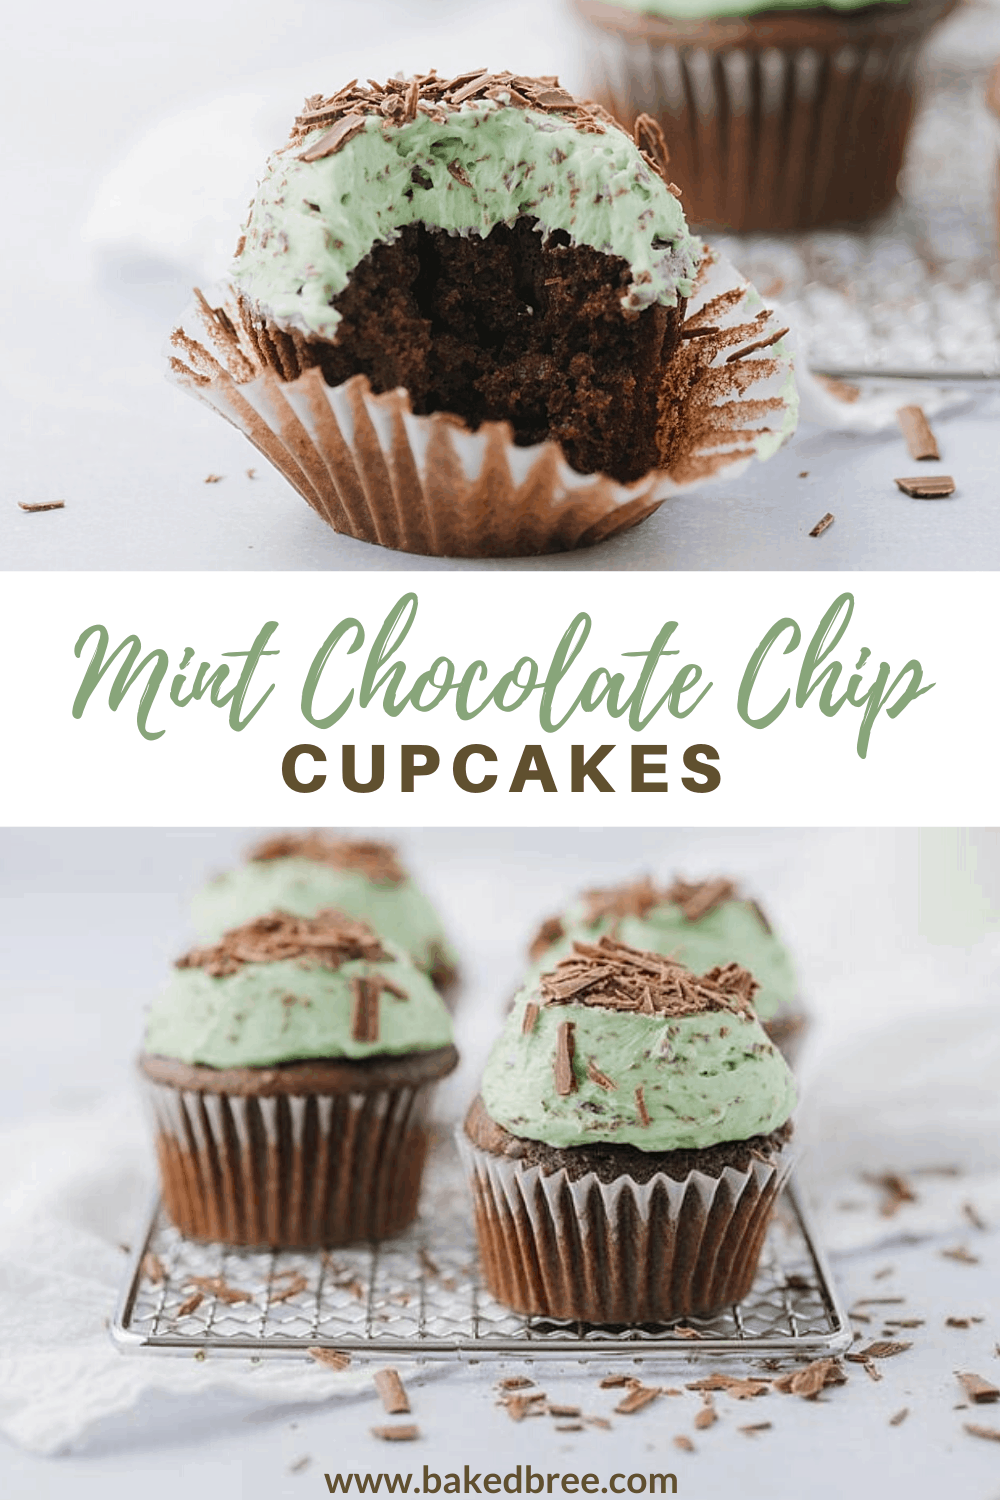 Mint Chocolate Chip Cupcakes | For The Mint Chocolate Chip Lovers